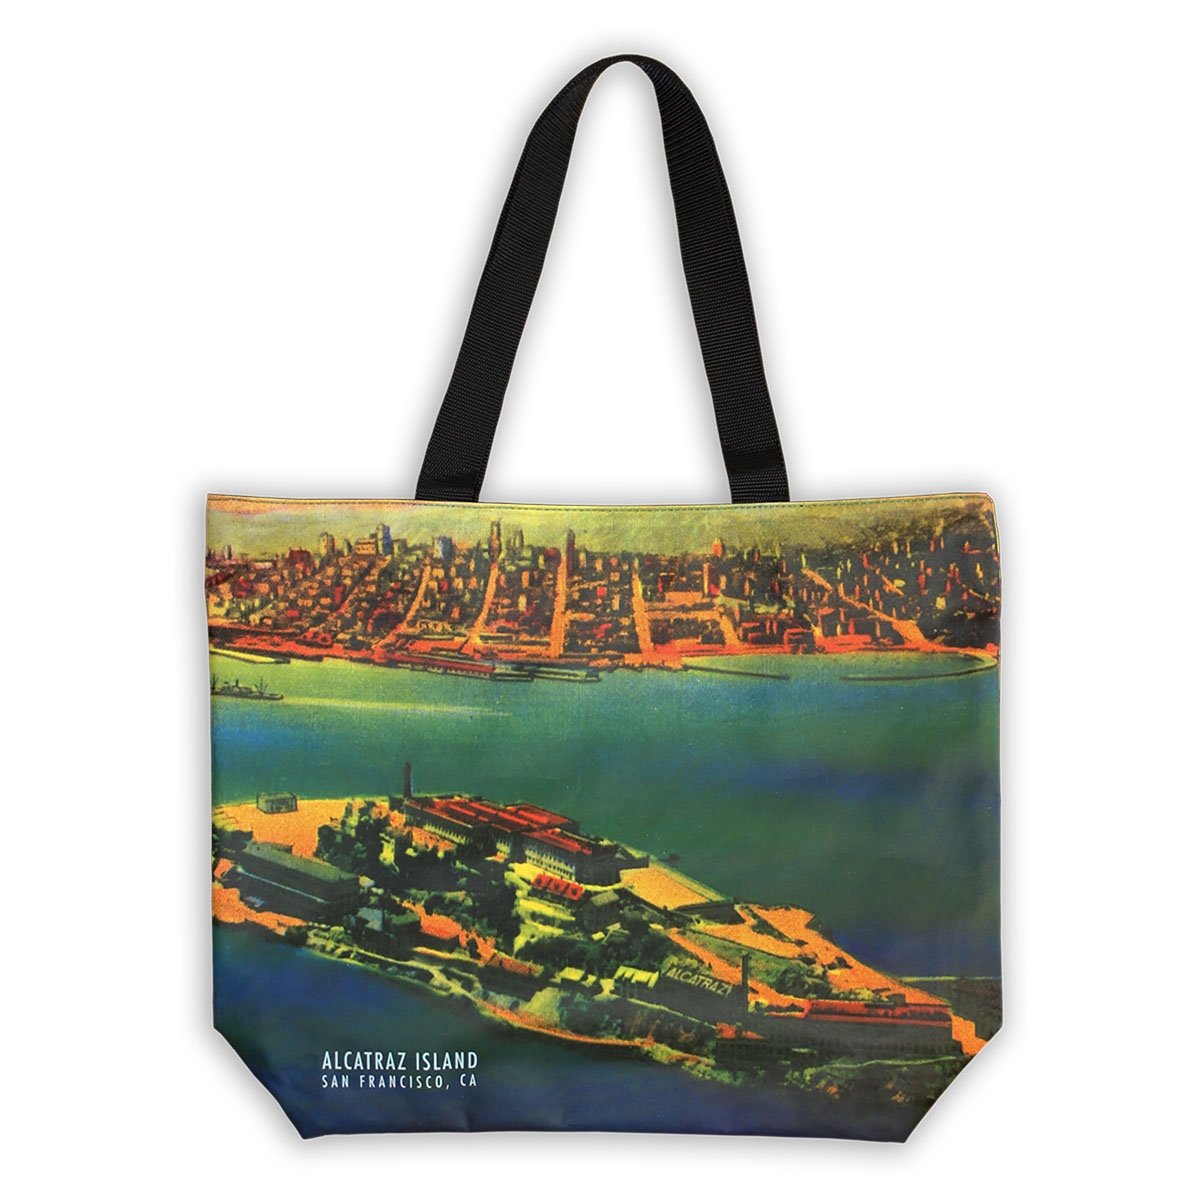 Colorful vintage-inspired tote bag featuring aerial view of Alcatraz Island.